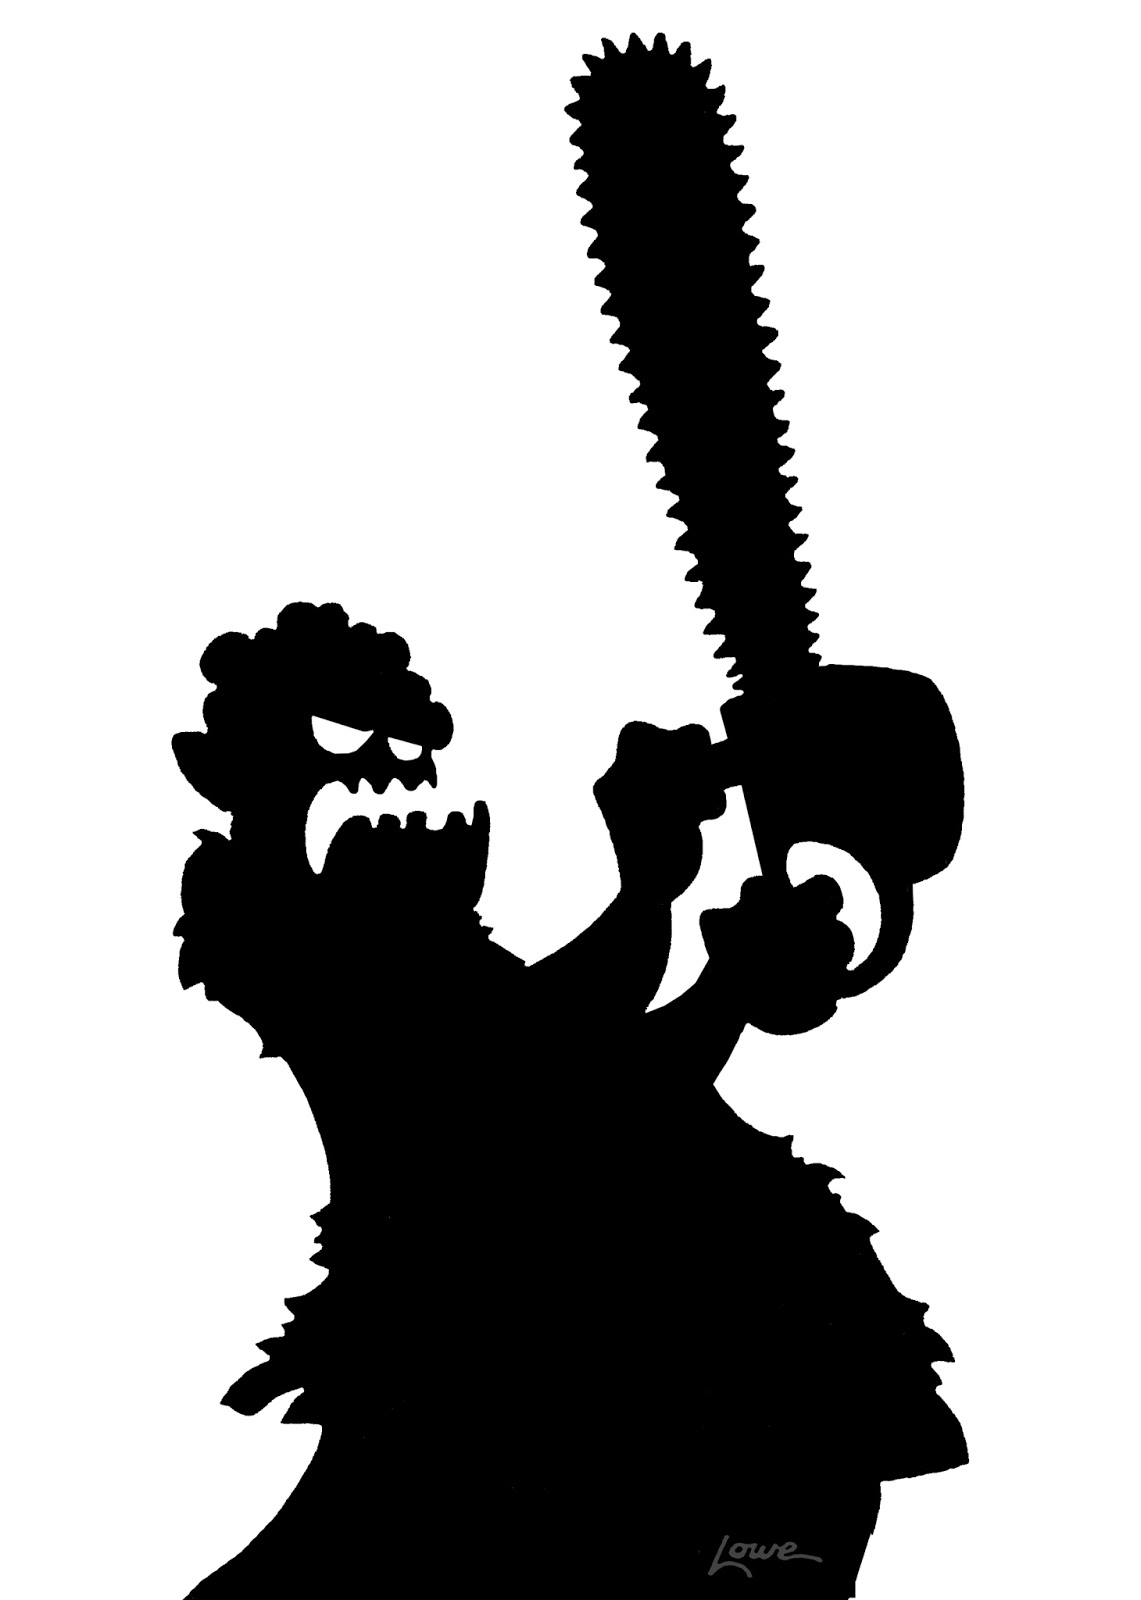 dave-lowe-design-the-blog-maniacal-window-silhouette-printables